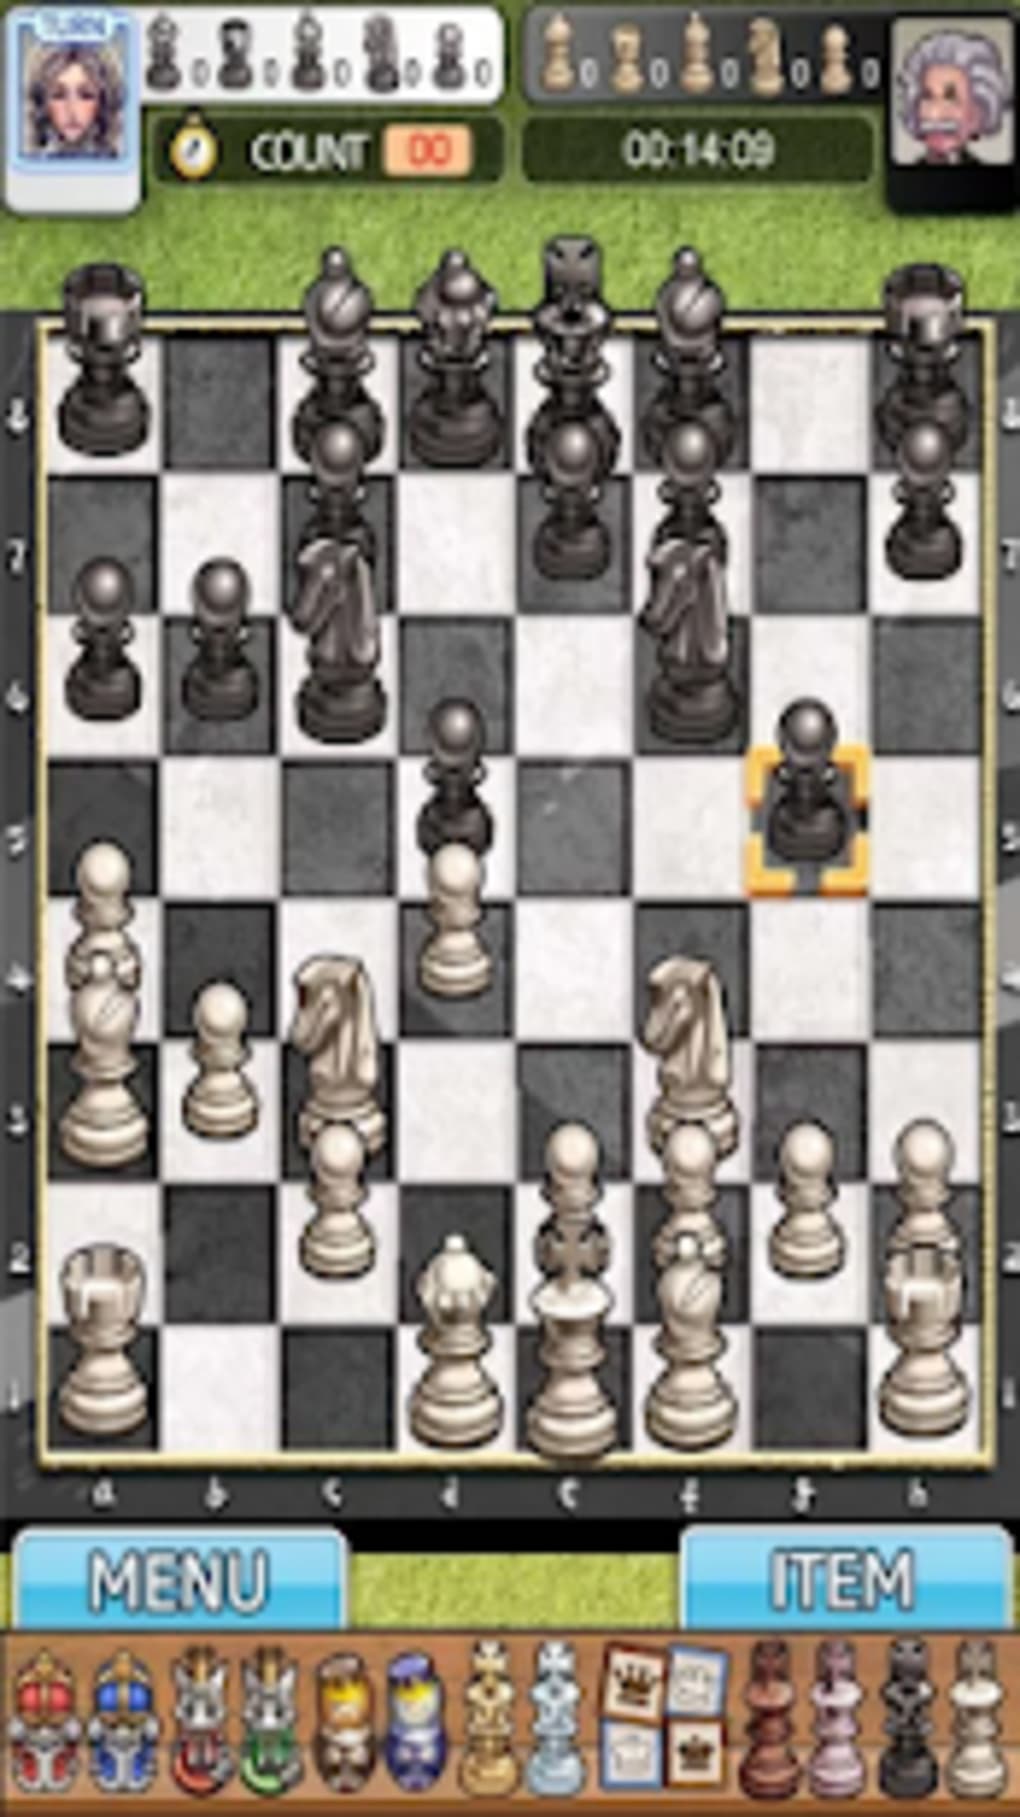 Download Classic Chess Master (MOD) APK for Android